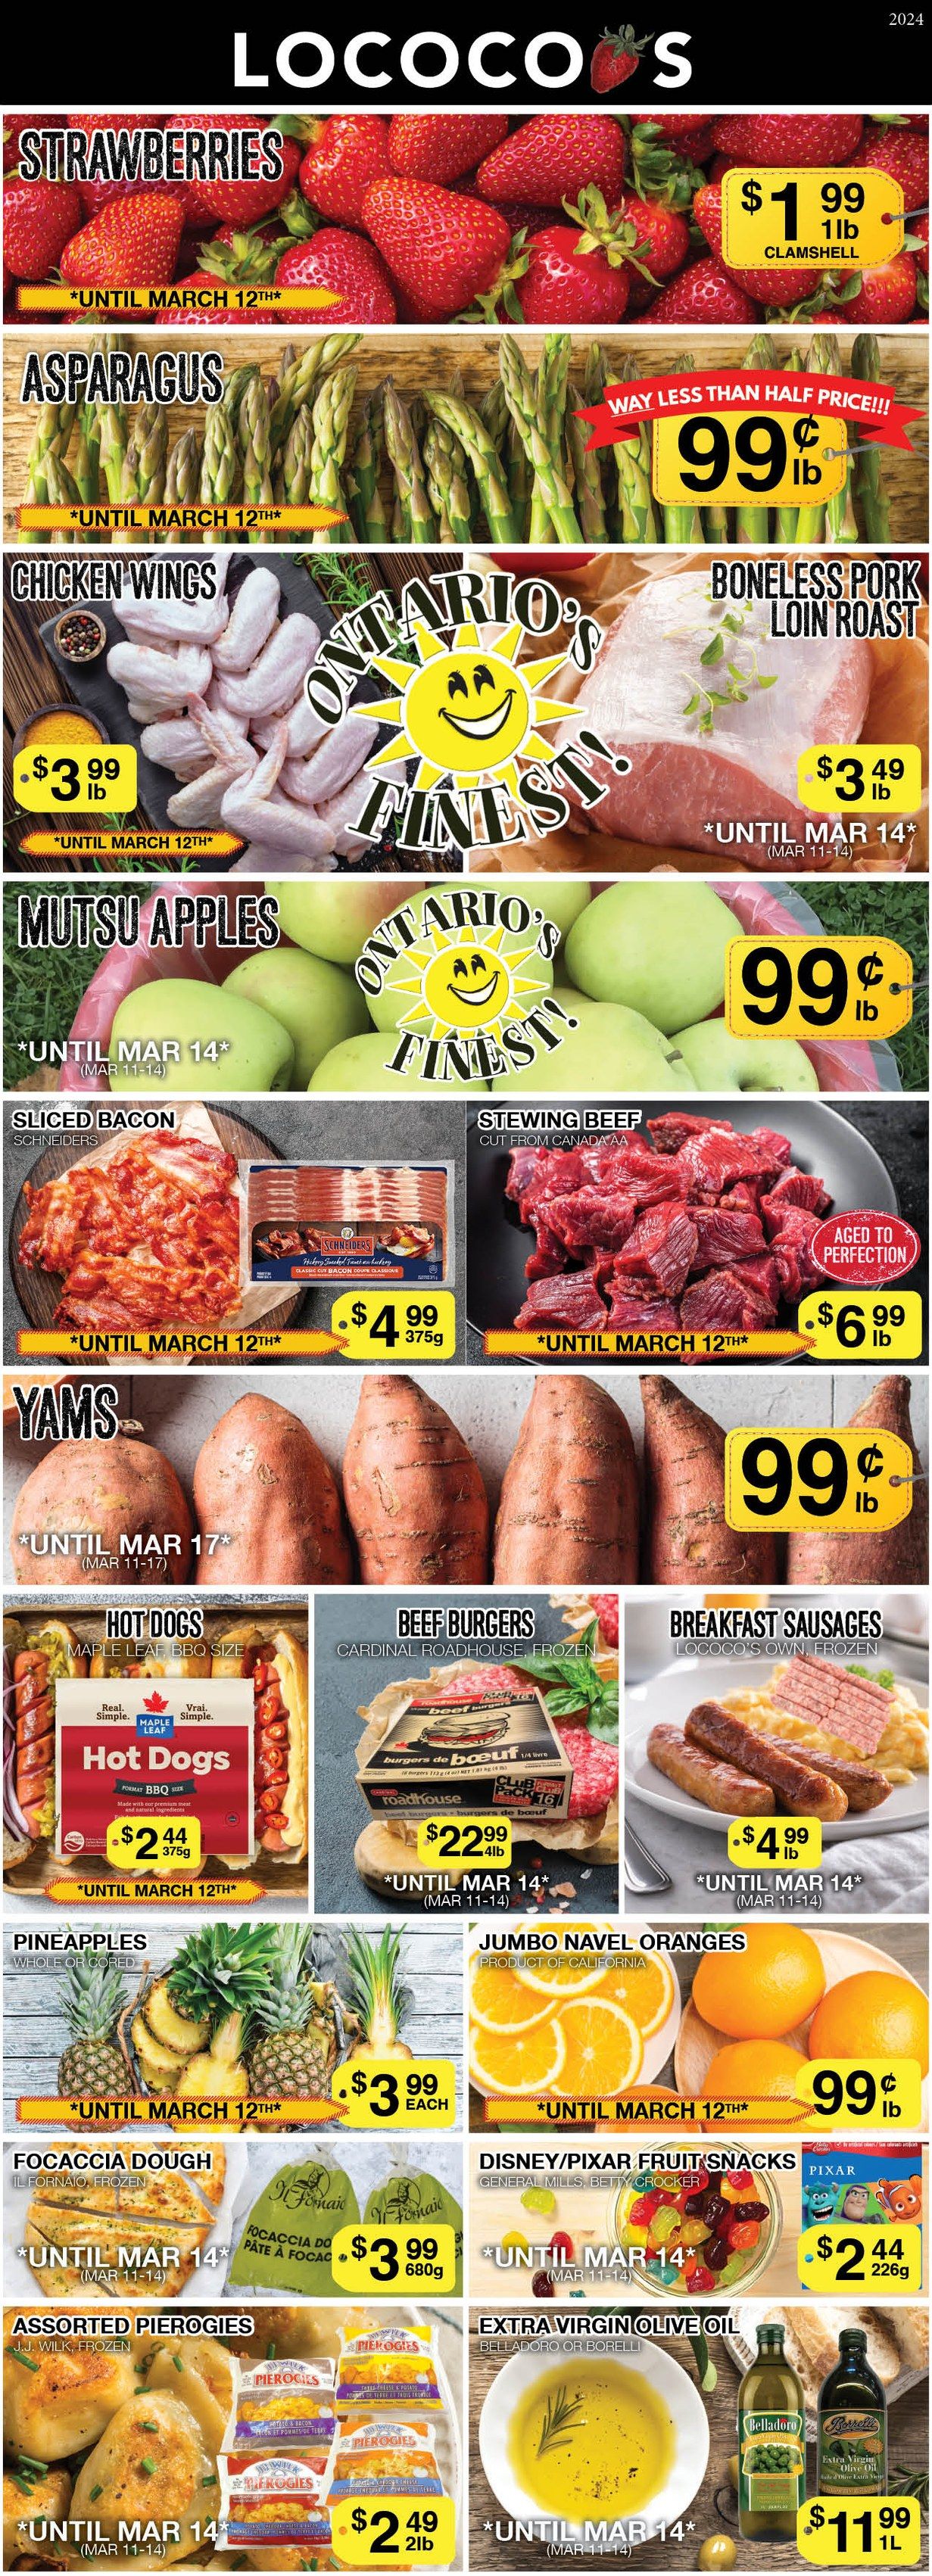 Lococo's Monday Specials Flyer from Mar 11th to Mar 14th 2024